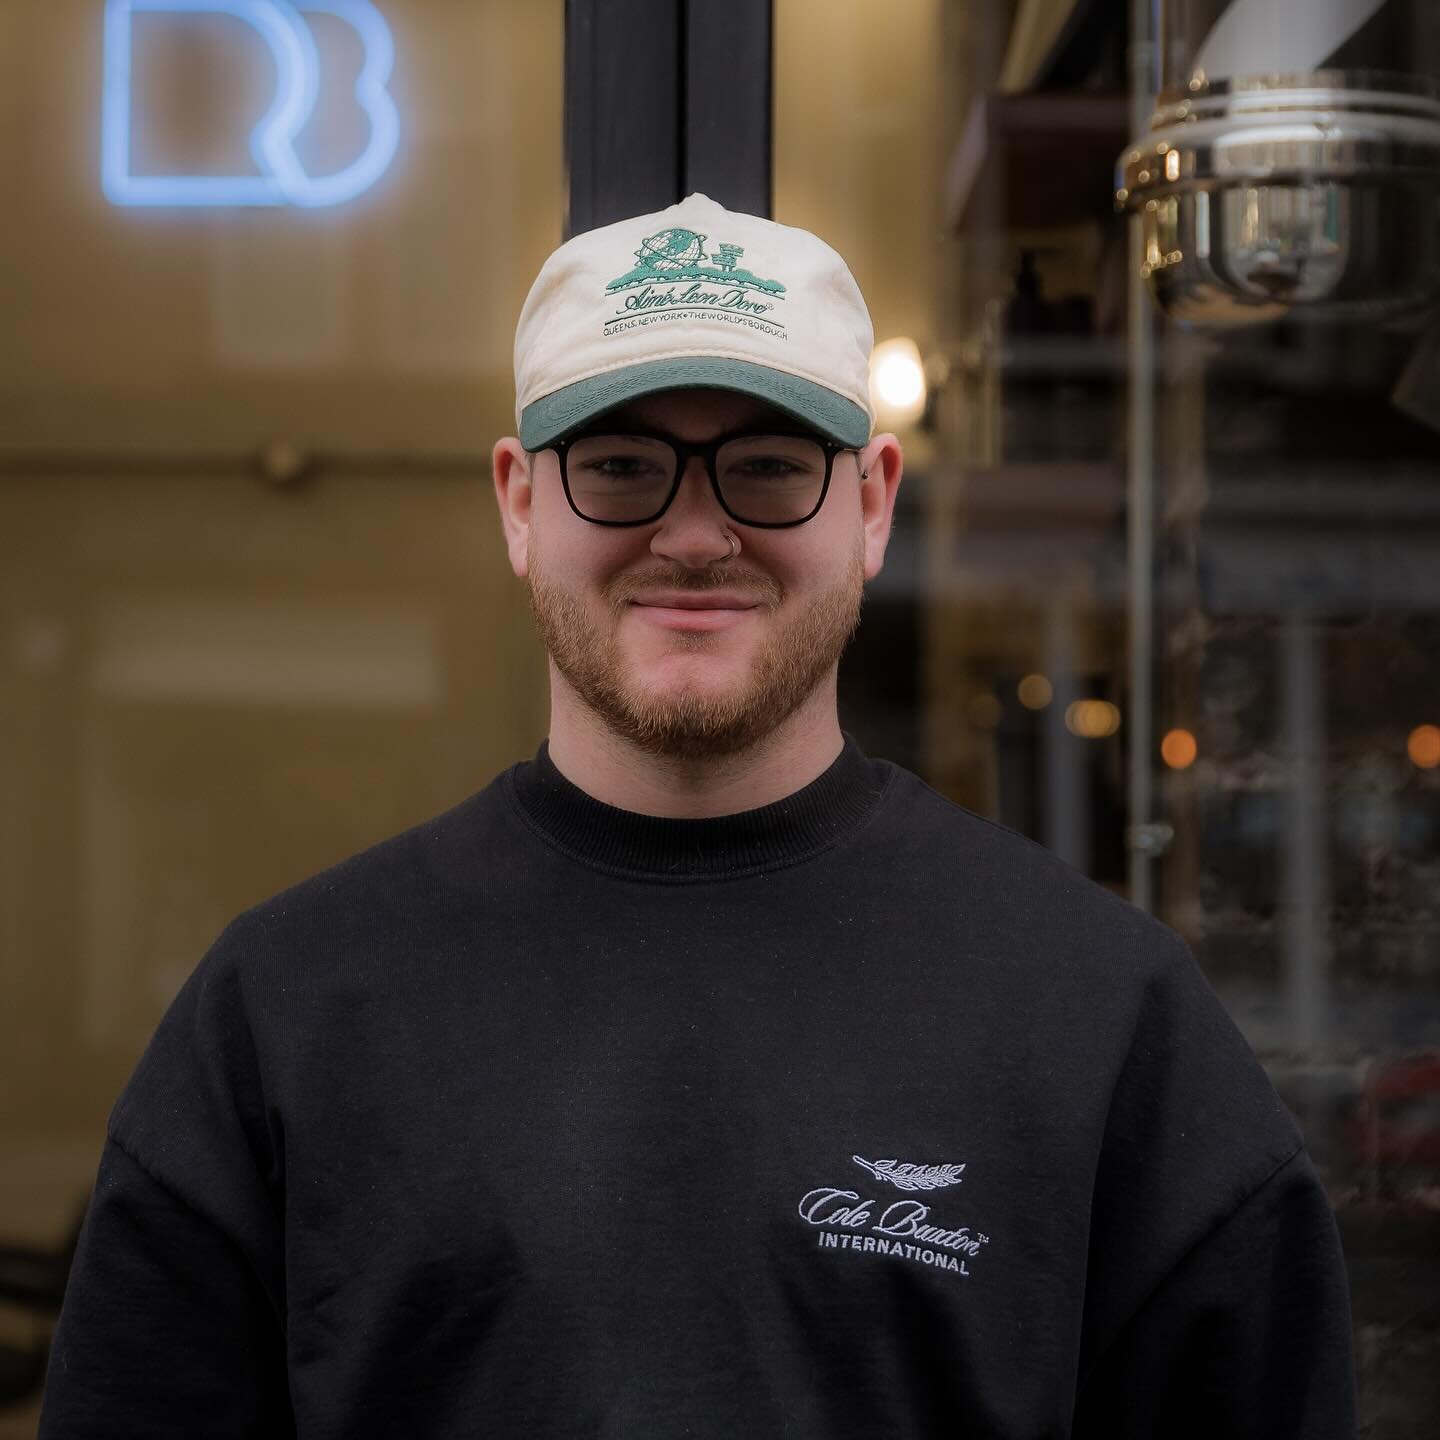 G! Aka  @grahamoc_hair &ndash; the powerhouse of infectious laughter and incredible enthusiasm for the trade! His passion is not just infectious it&rsquo;s the fuel that helps ignites the entire atmosphere in Bruntsfield!

💙 #ragandbonebarbershop #l